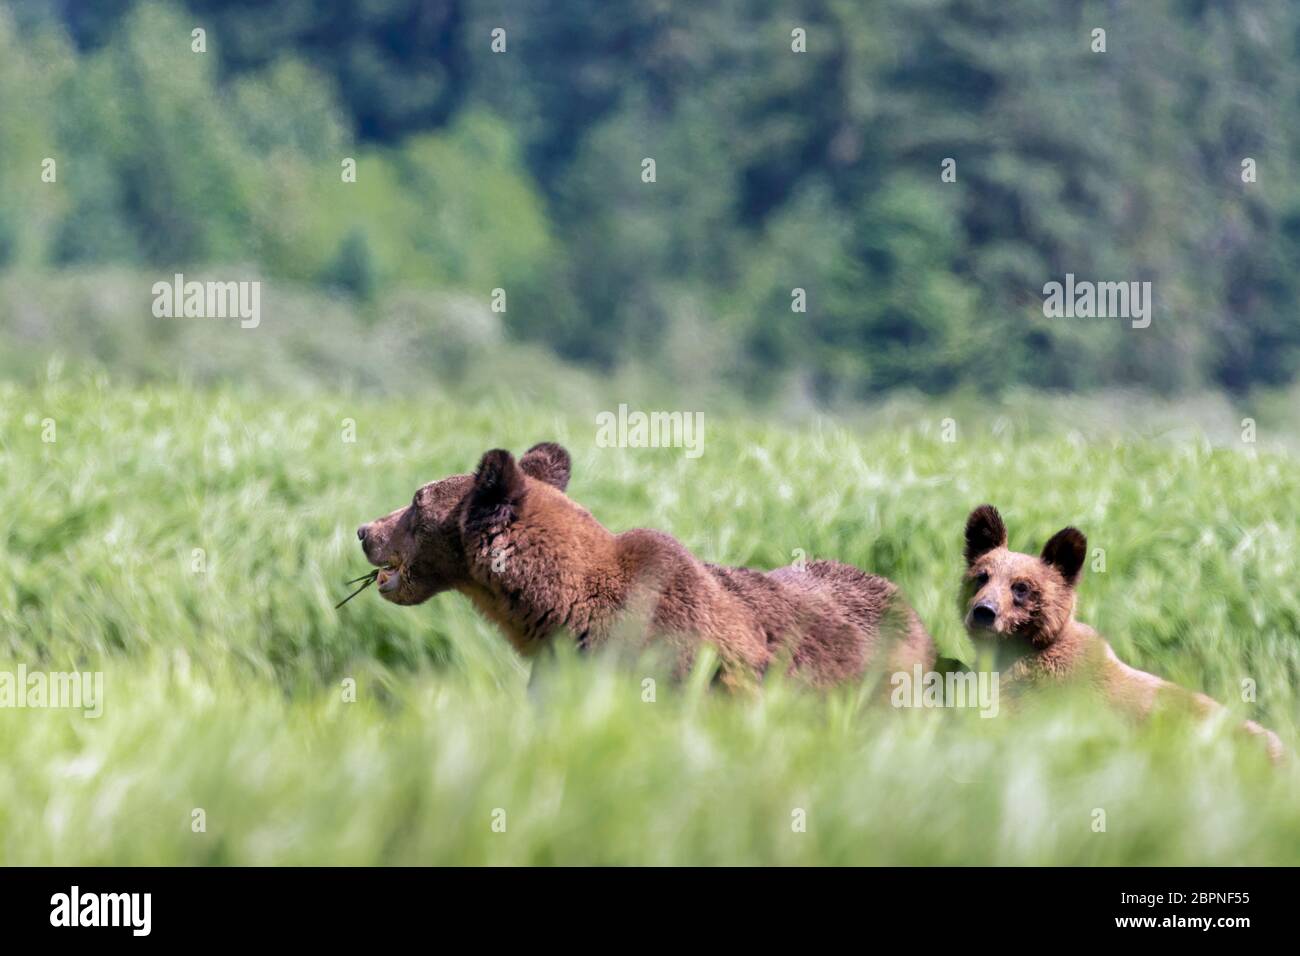 Mother grizzly and cub grazing in the high sedge grasses, Khutzeymateen Grizzly Bear Sanctuary, BC Stock Photo